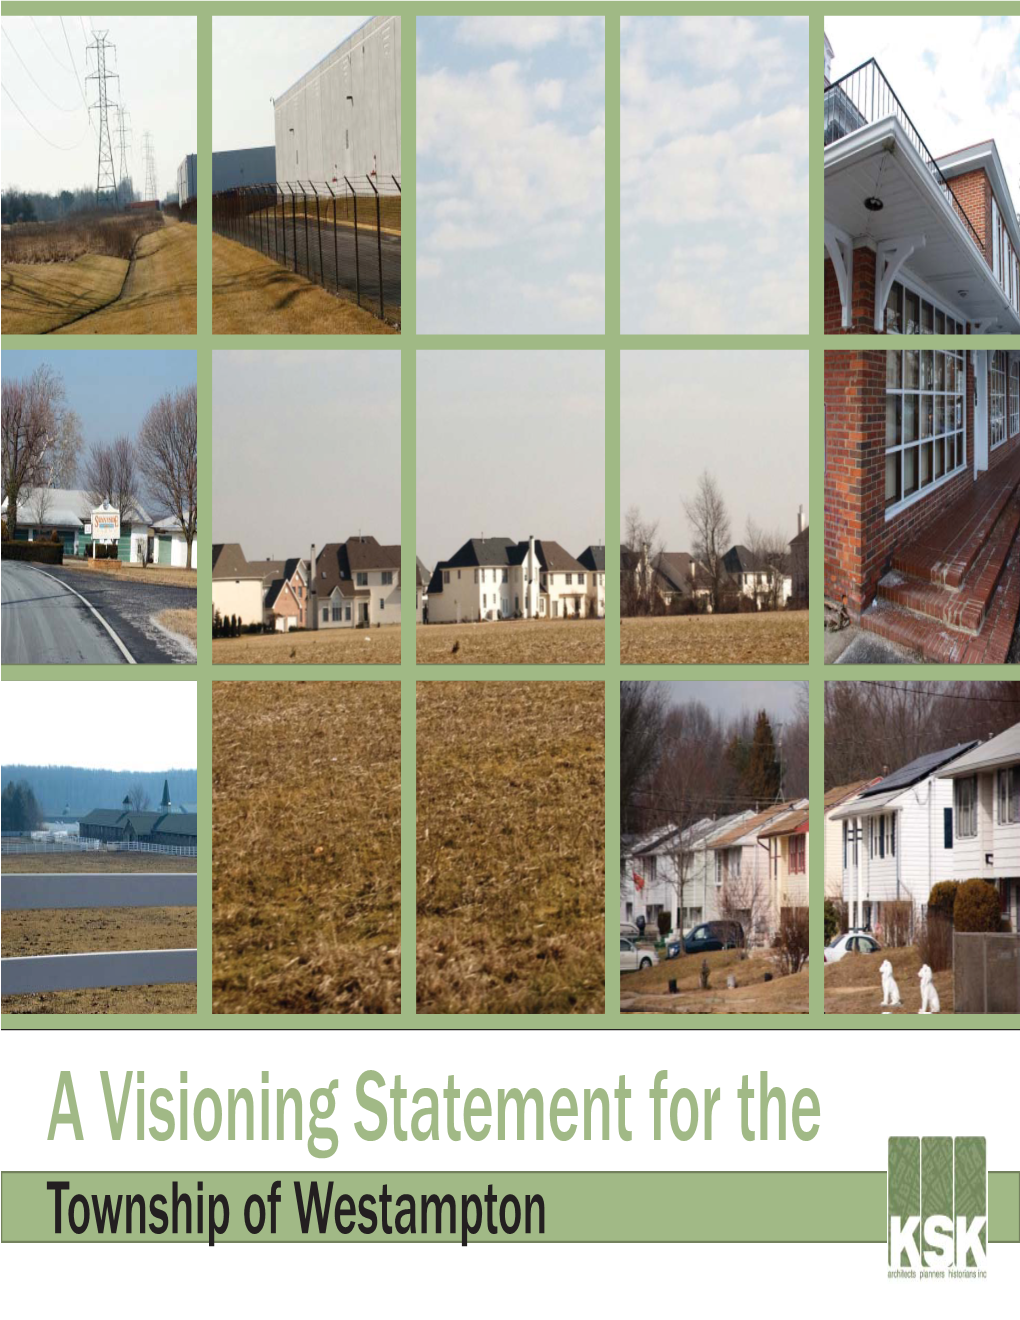 A Visioning Statement for the Township of Westampton